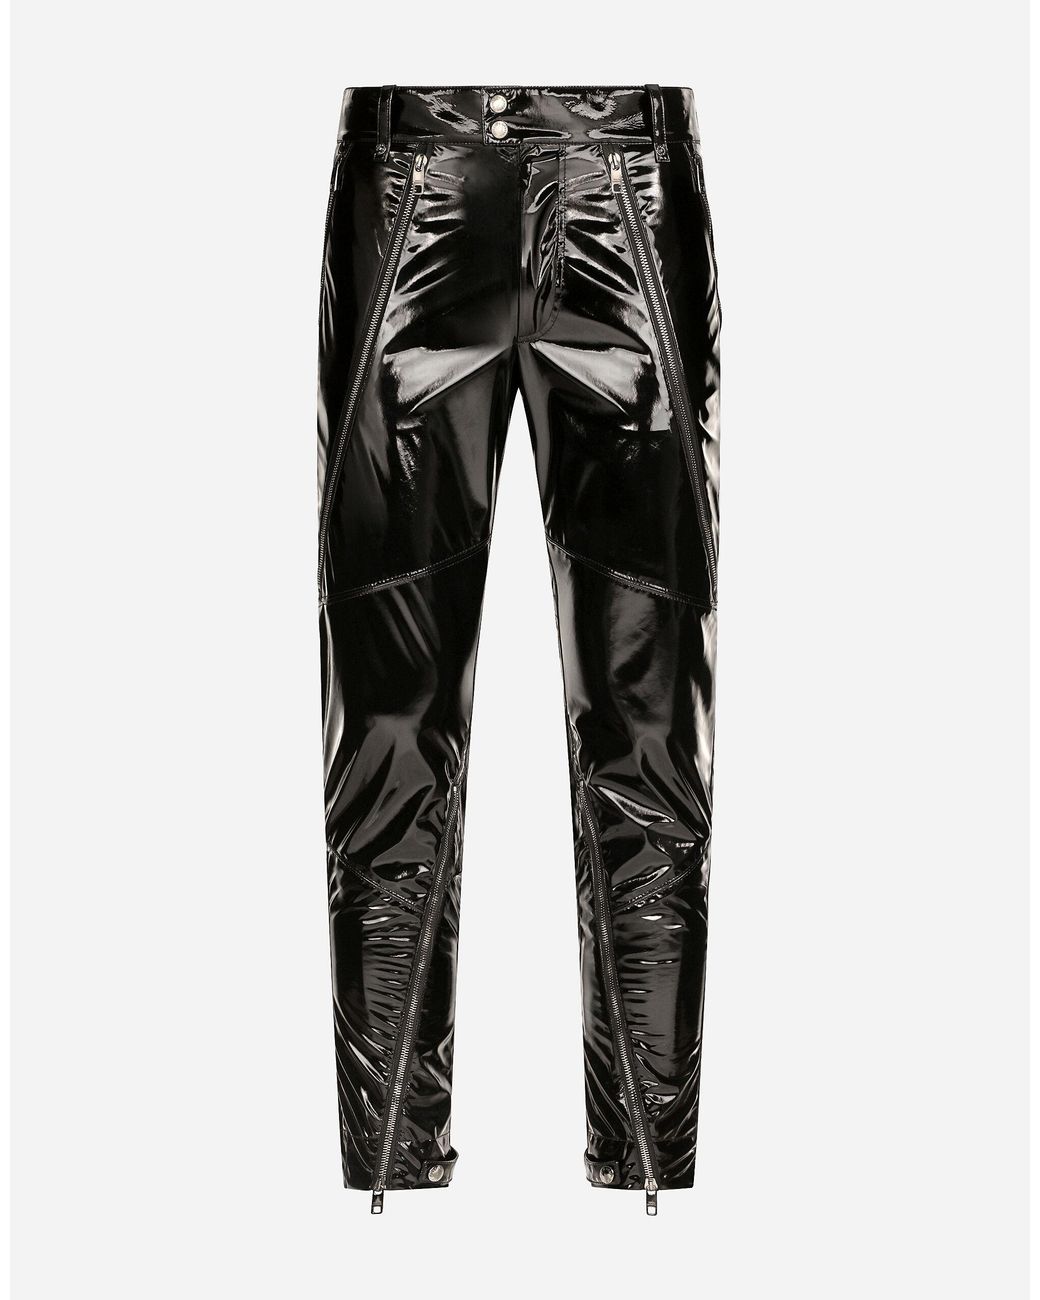 Dolce & Gabbana Skinny Patent Leather Pants With Zipper Details in ...